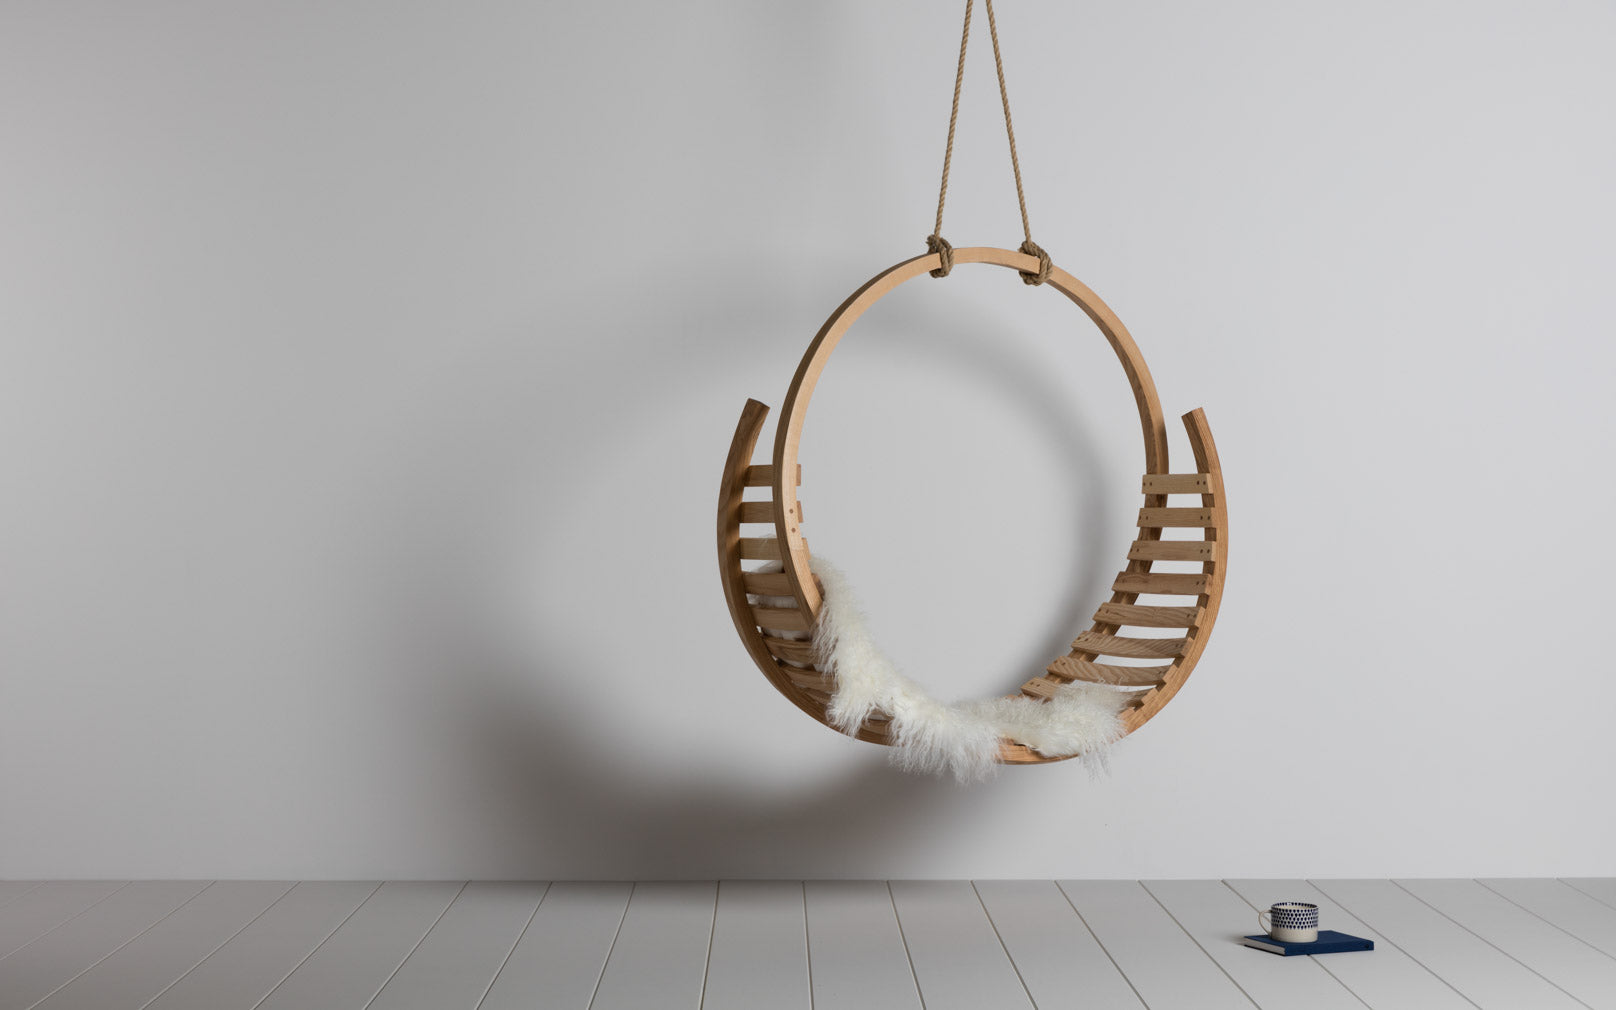 The Tom Raffield Amble Hanging Seat made of steam-bent wood.